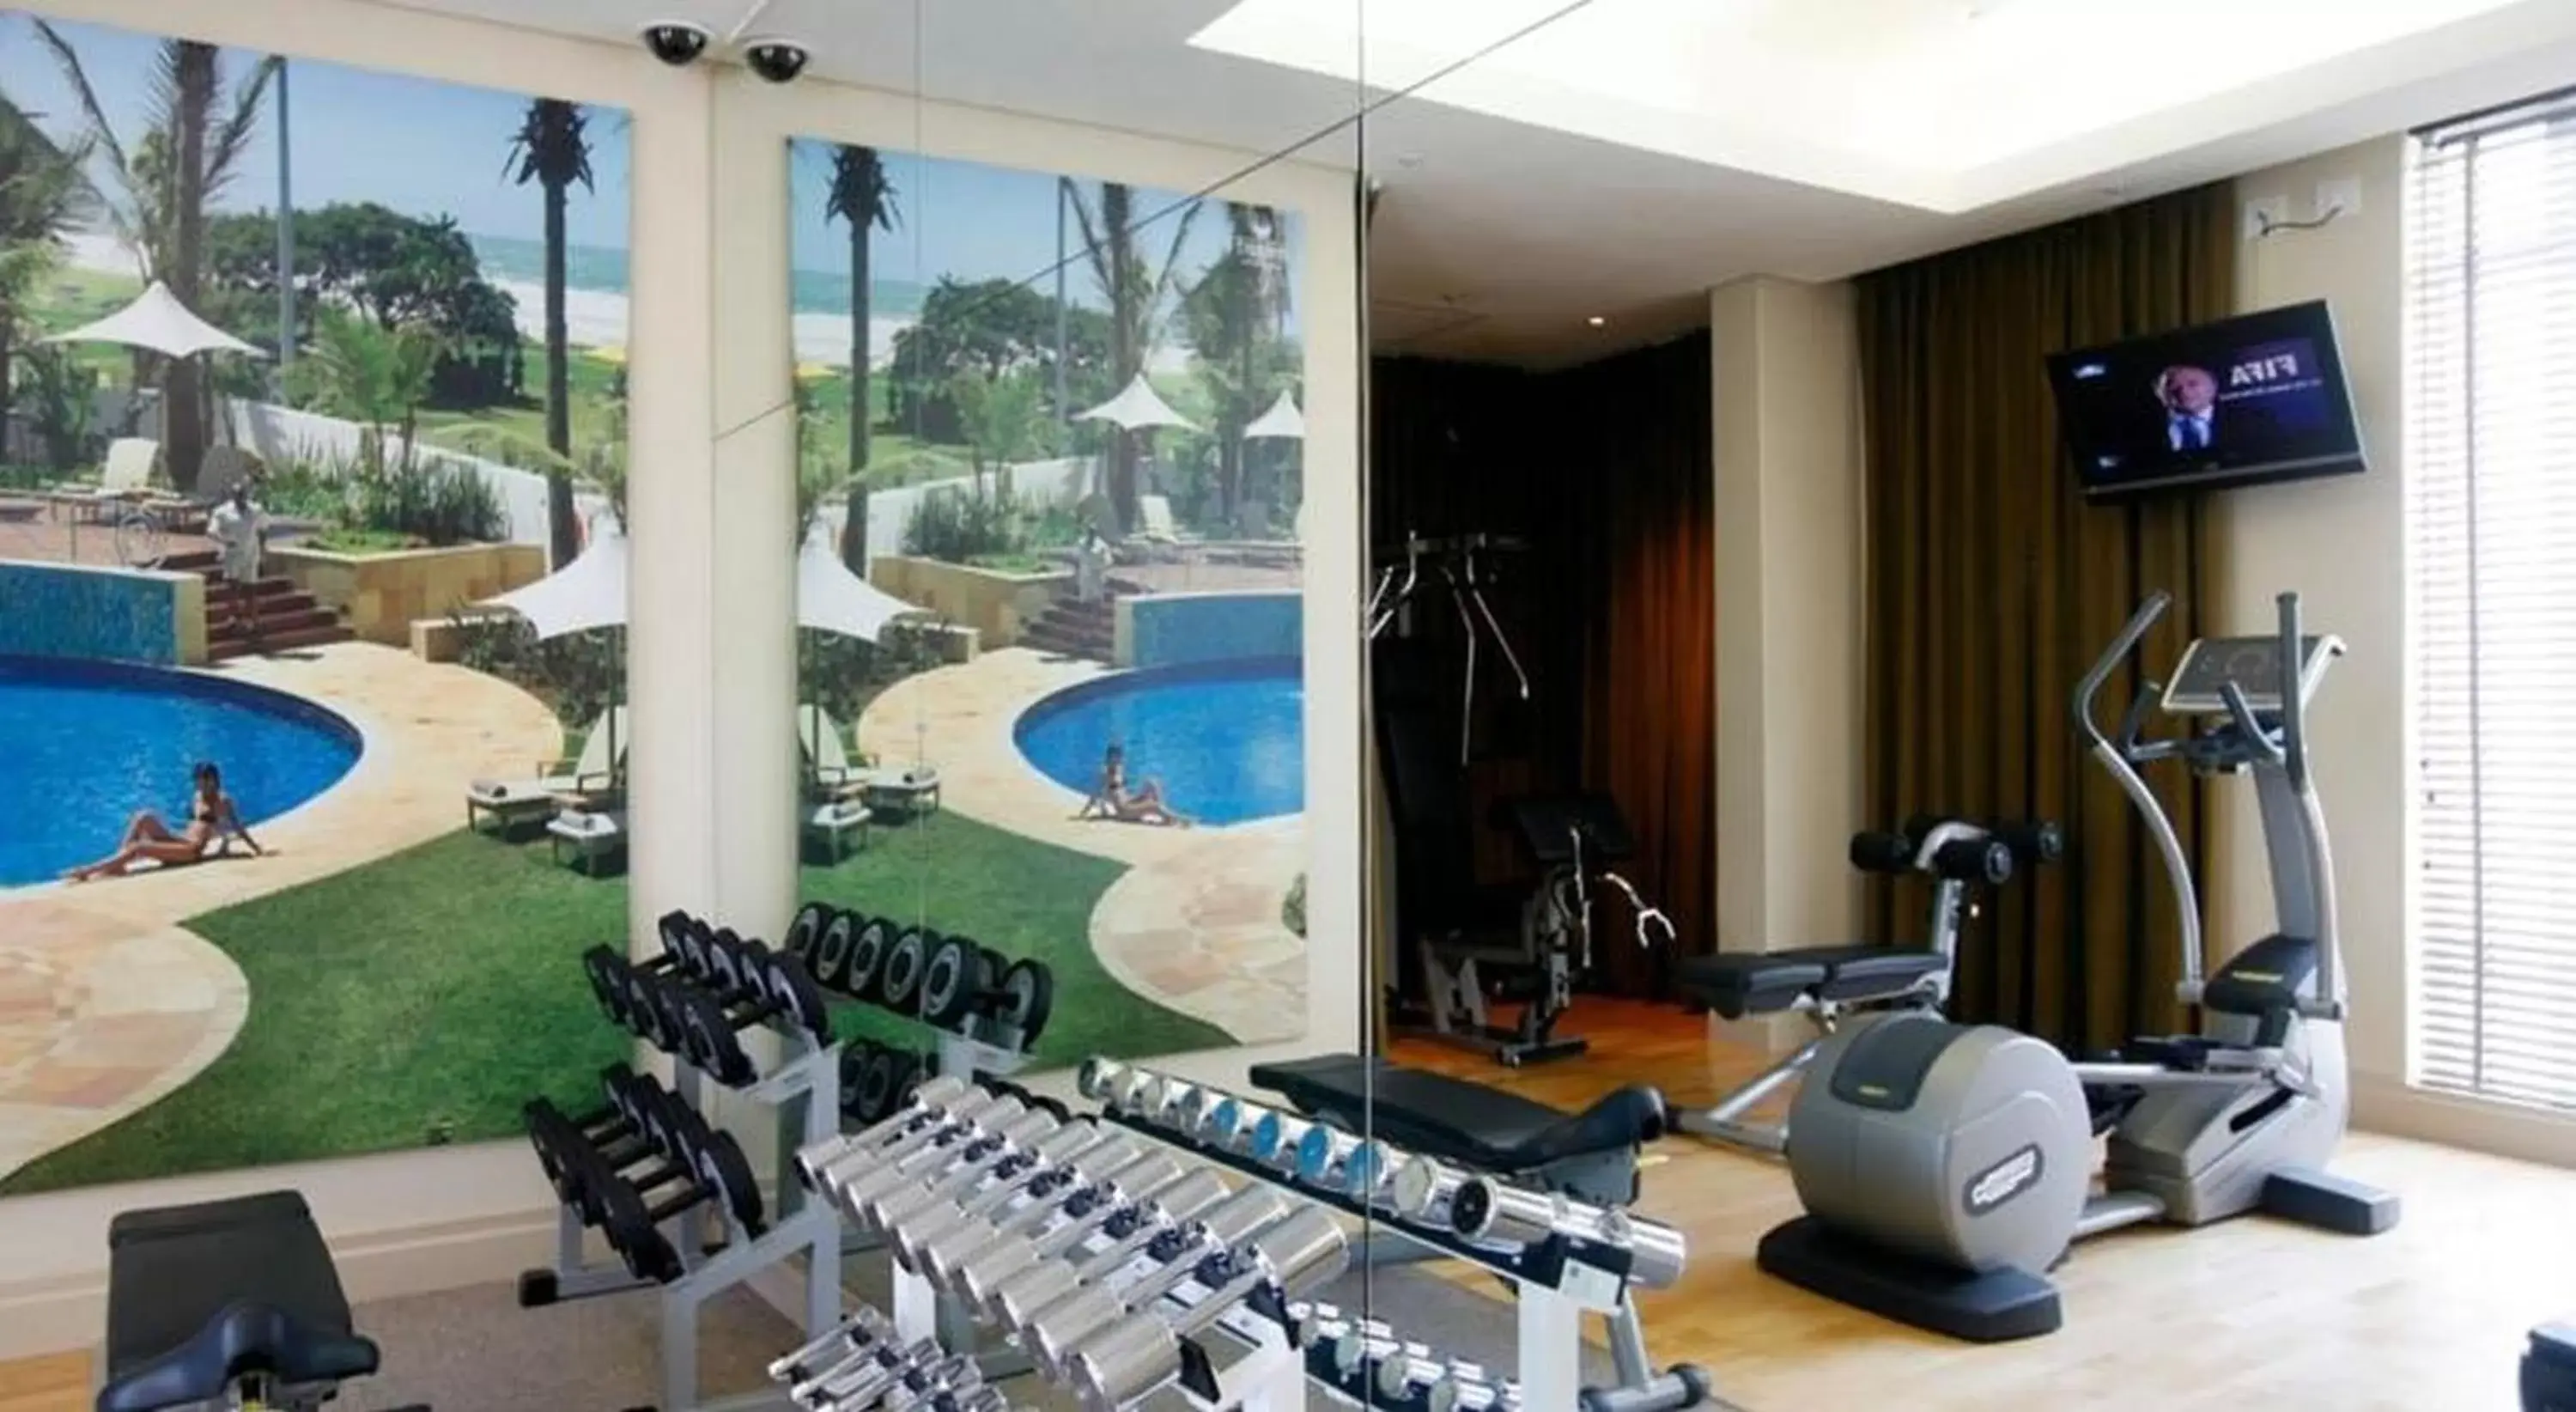 Fitness centre/facilities in Suncoast Hotel & Towers